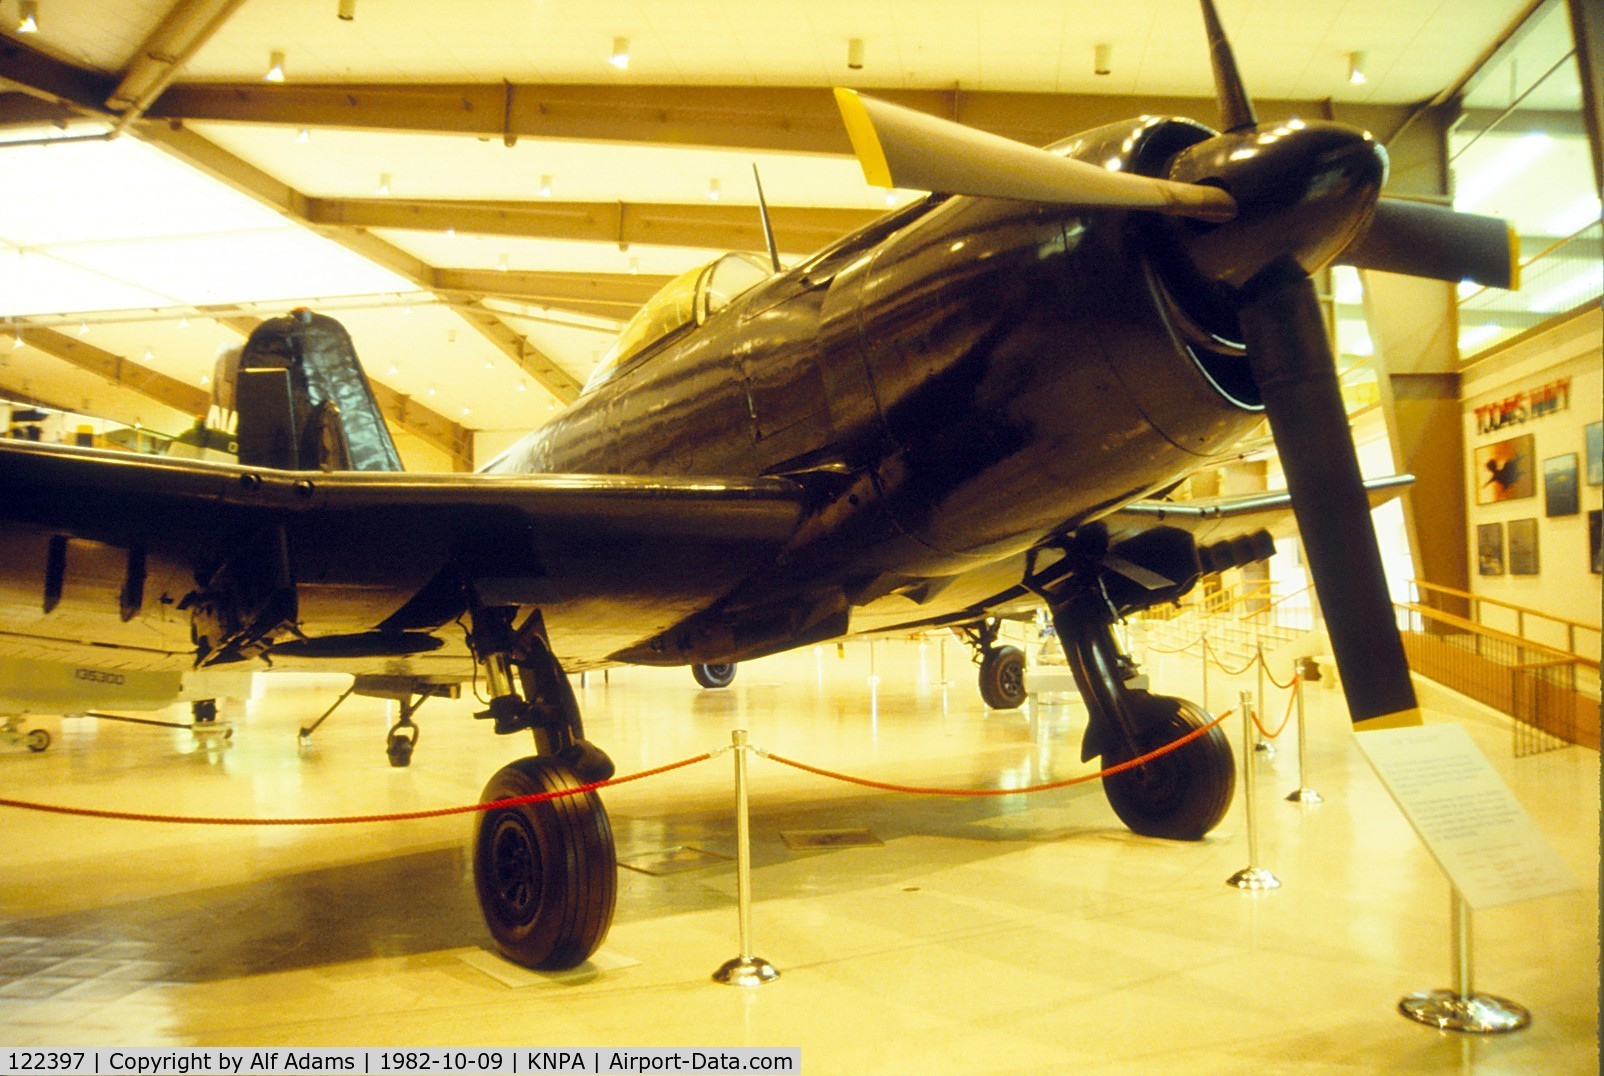 122397, 1947 Martin AM-1 Mauler C/N Not found 122397, At the National Naval Aviation Museum, Pensacola, Florida in 1982.